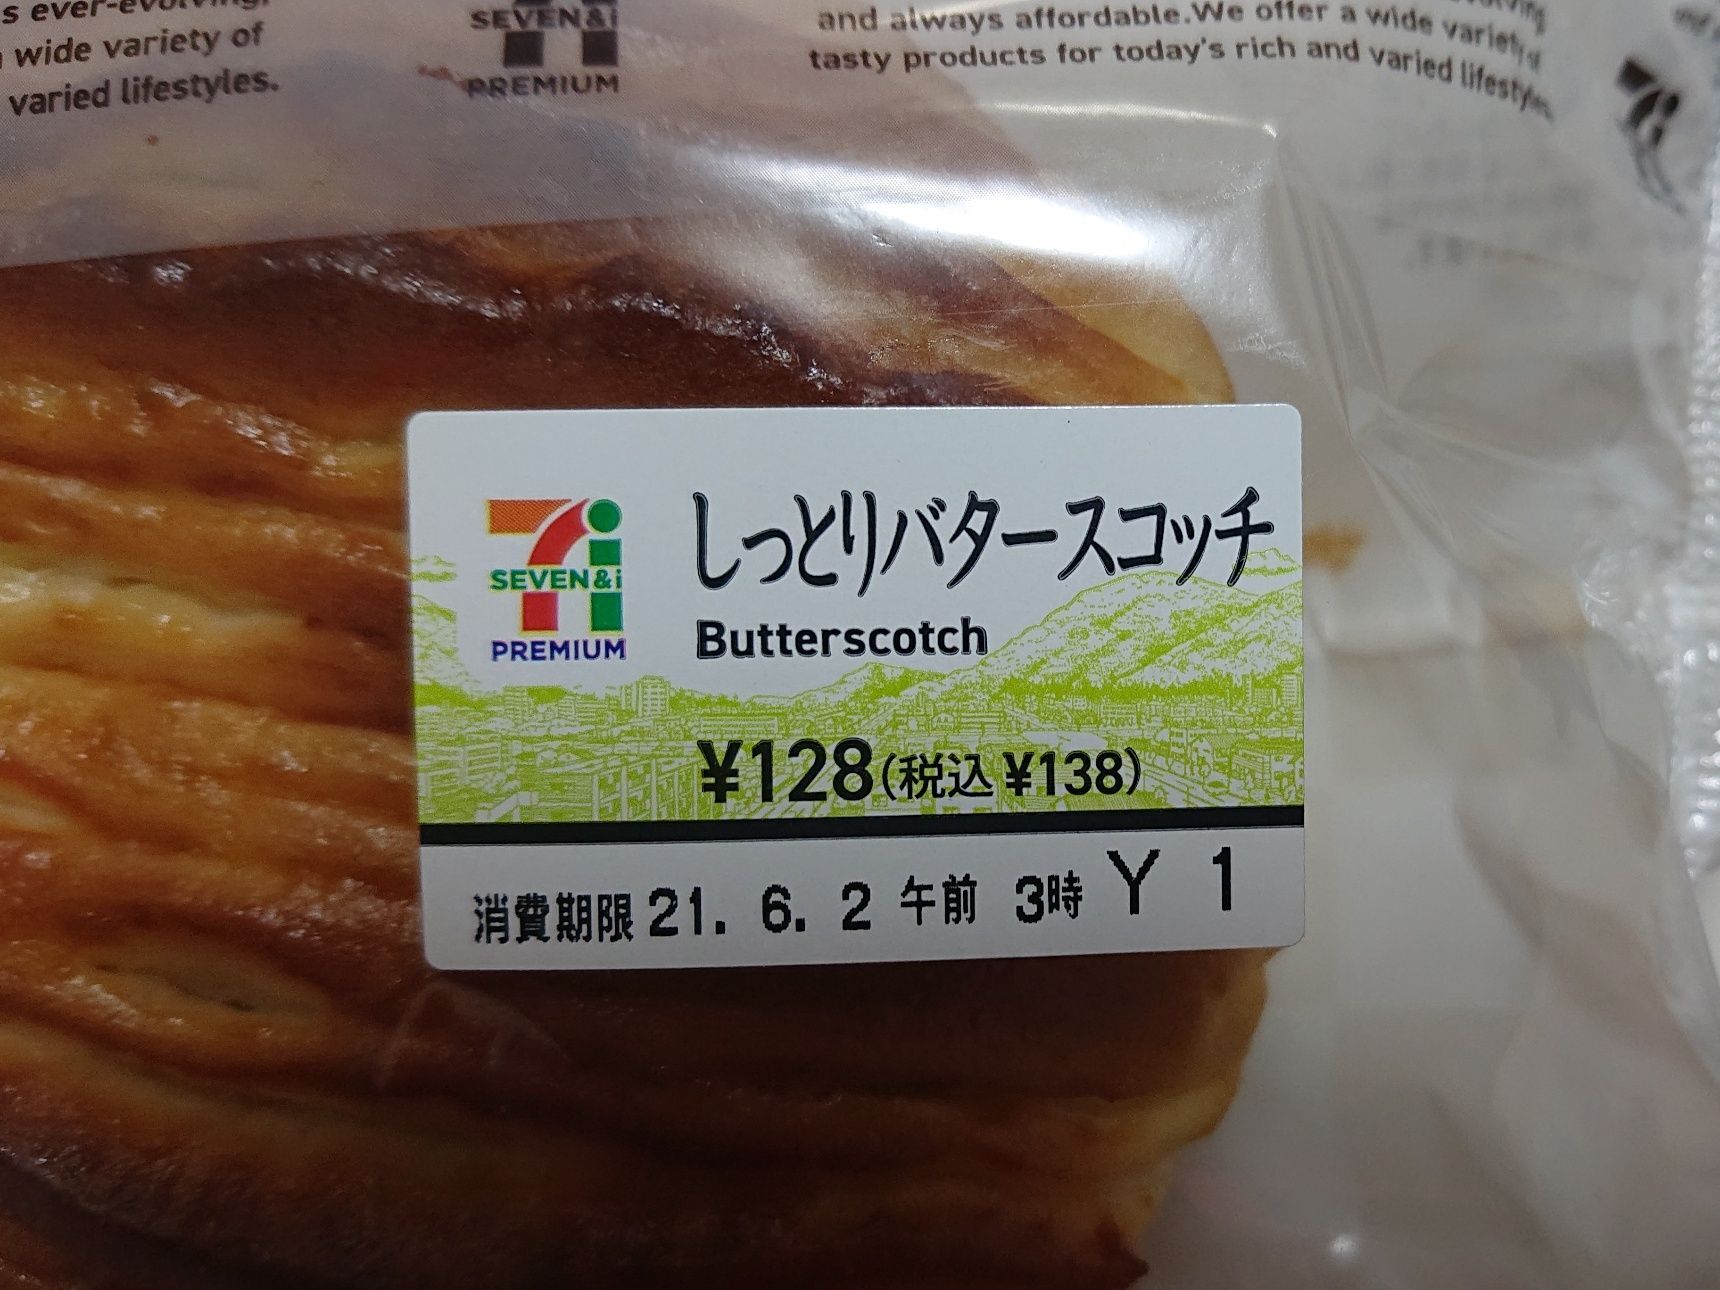  before 　しっとりバタースコッチ　butterscotch